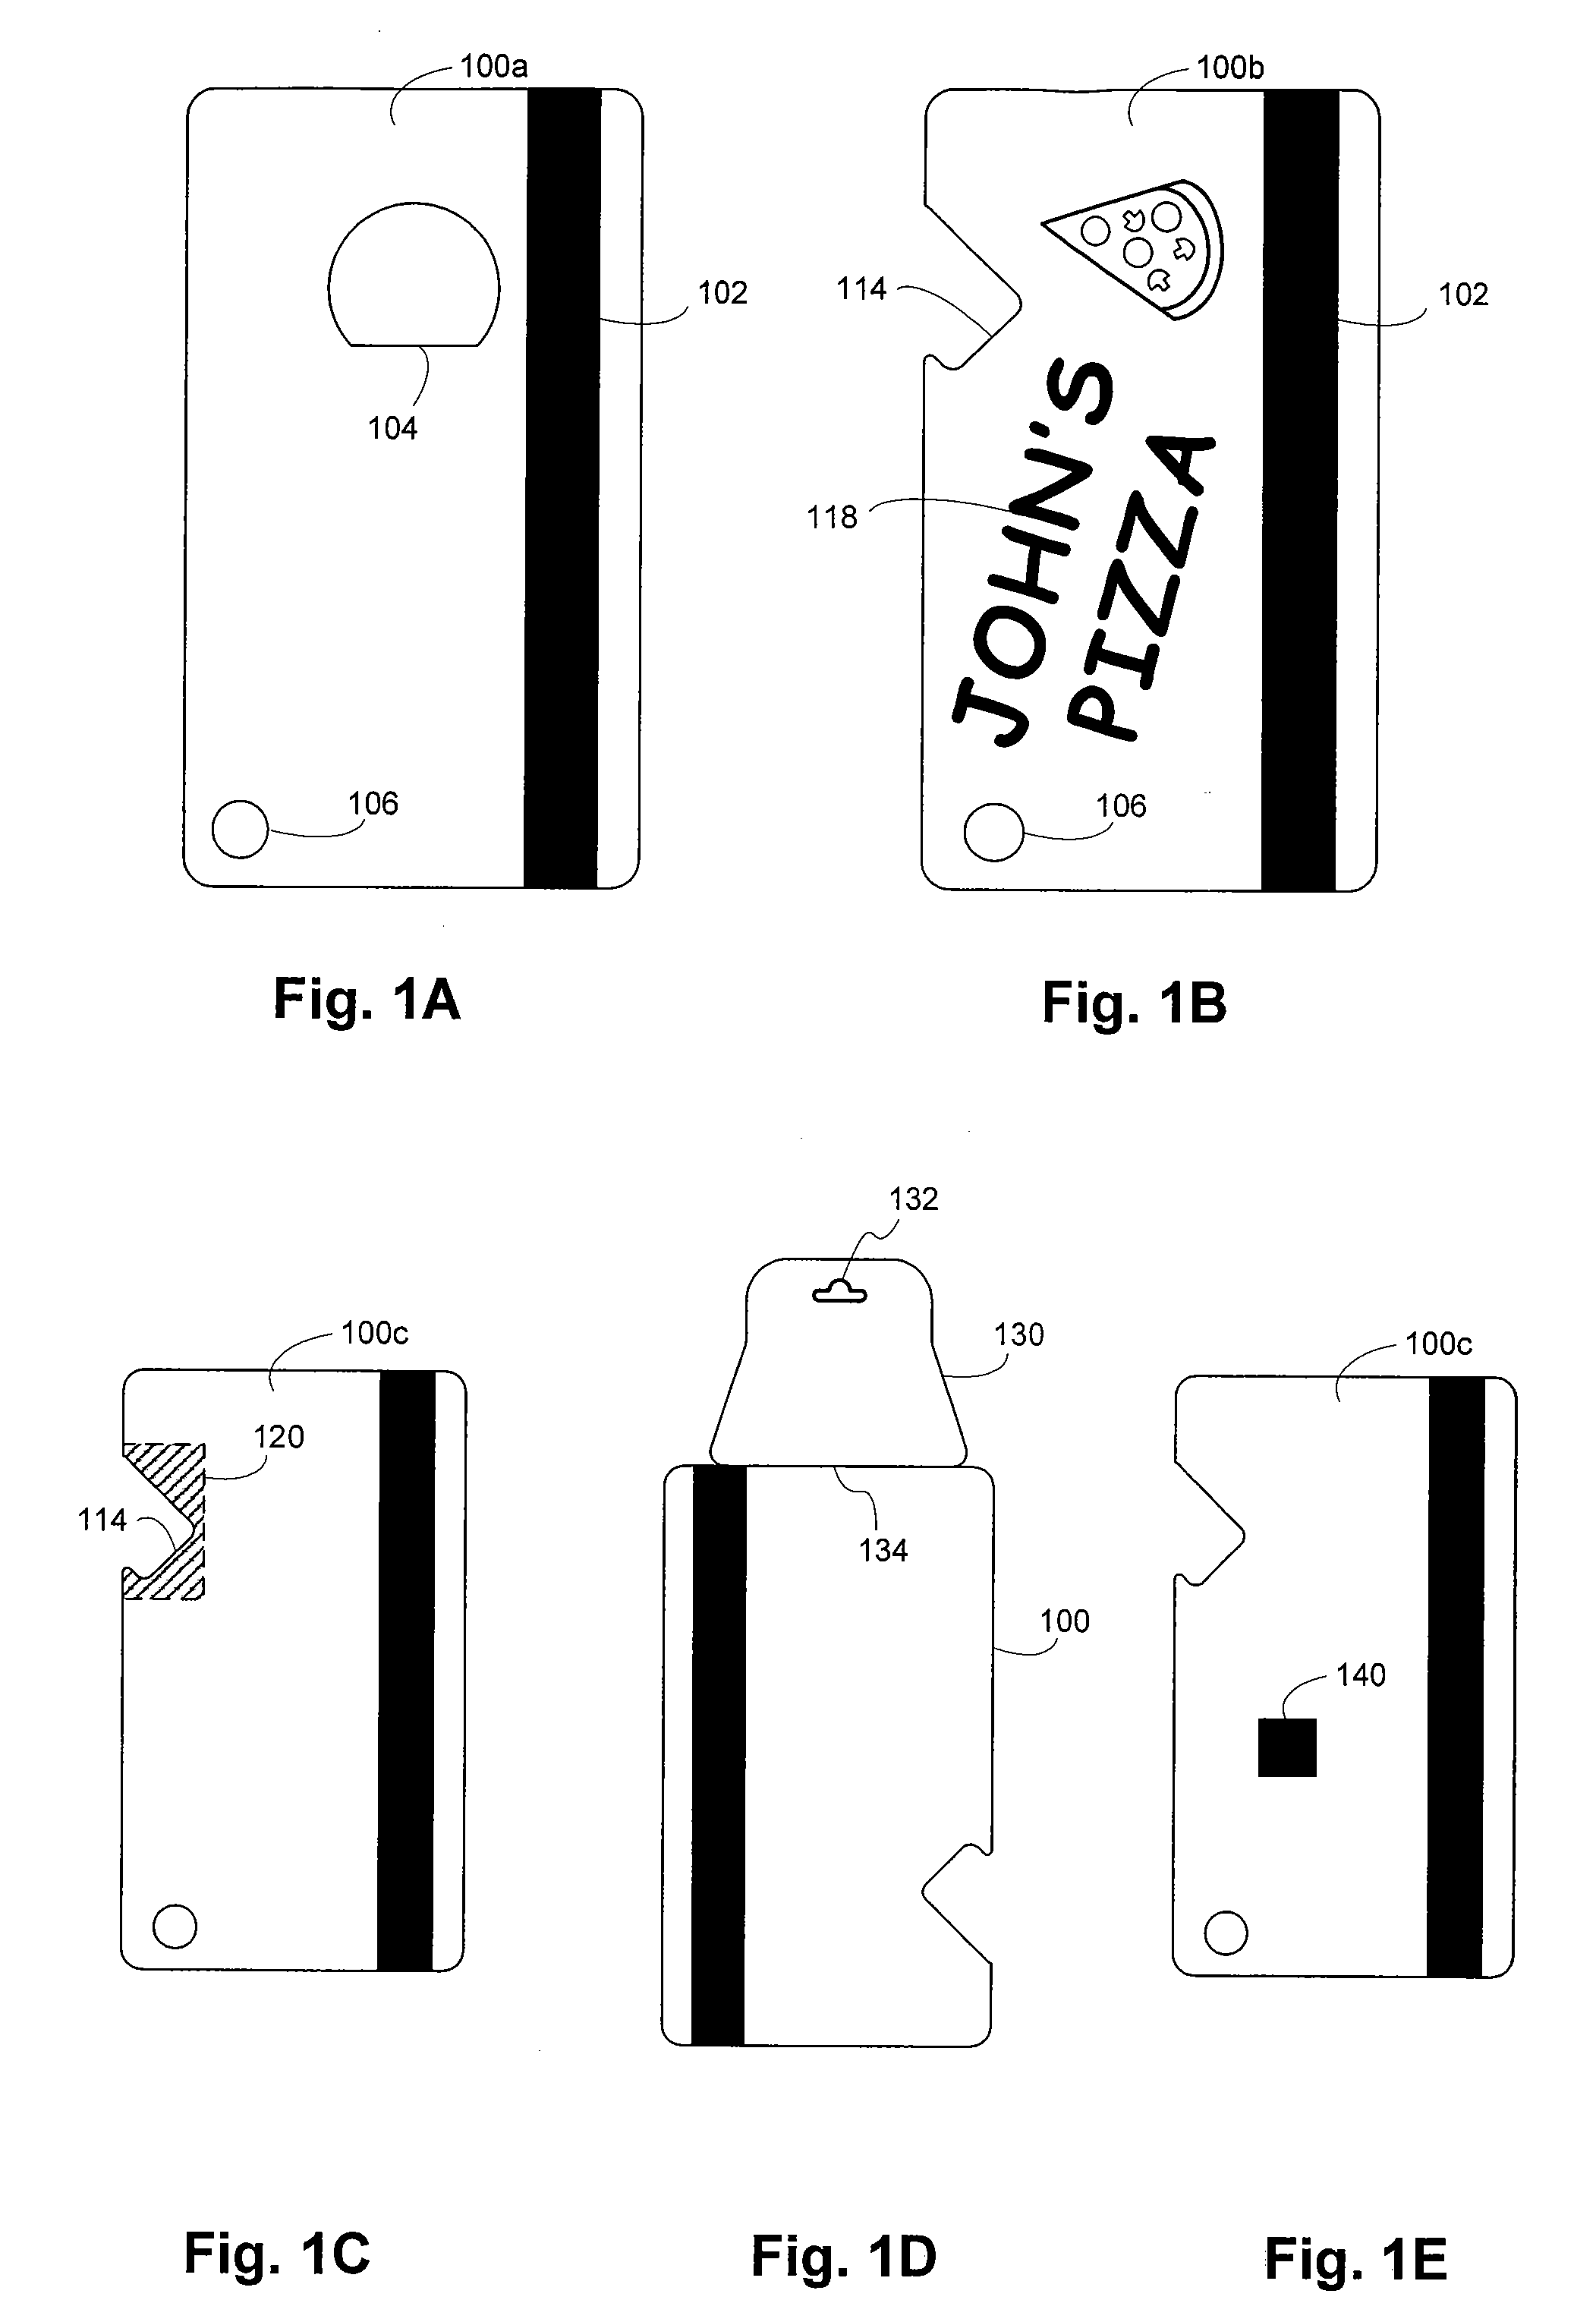 Presentation Instrument with Non-Financial Functionality